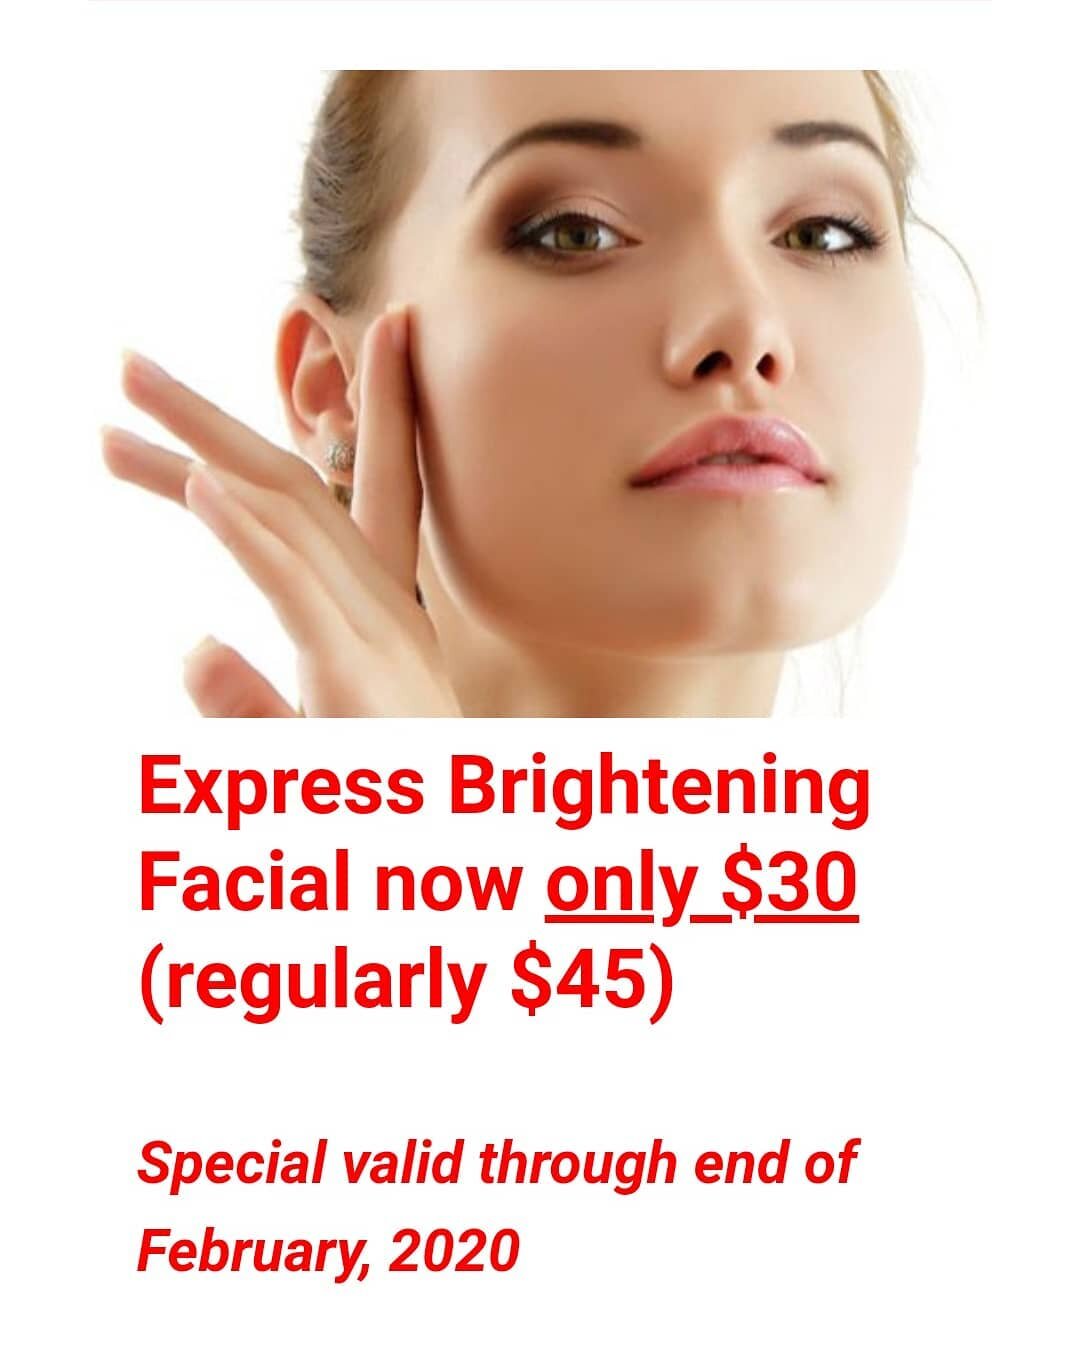 VALENTINES SPECIAL! 💘 
Express Brightening Facial now ONLY $30 (regularly $45). Offer valid through end of February, 2020.